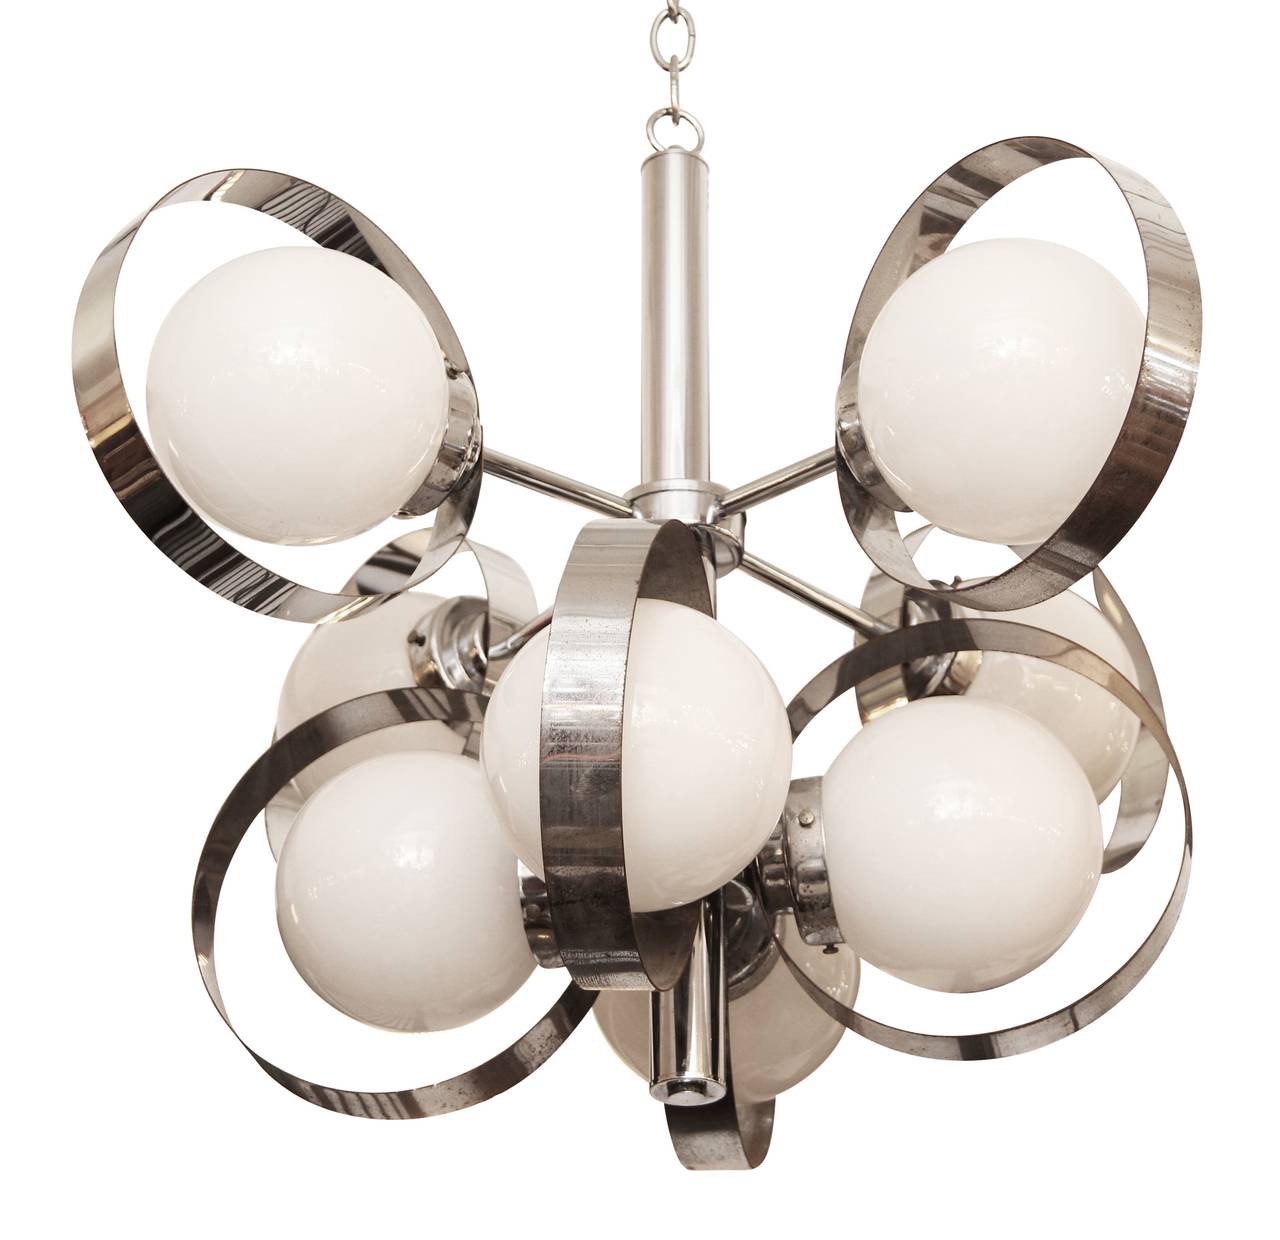 Italian Mid-Century Modern chrome and white glass fixture from the 1960s. Mid-Century Modern chandelier featuring 8 lights. Cleaned and rewired. Made in Italy with a chrome finish. Please note, this item is located in our Los Angeles, CA location.